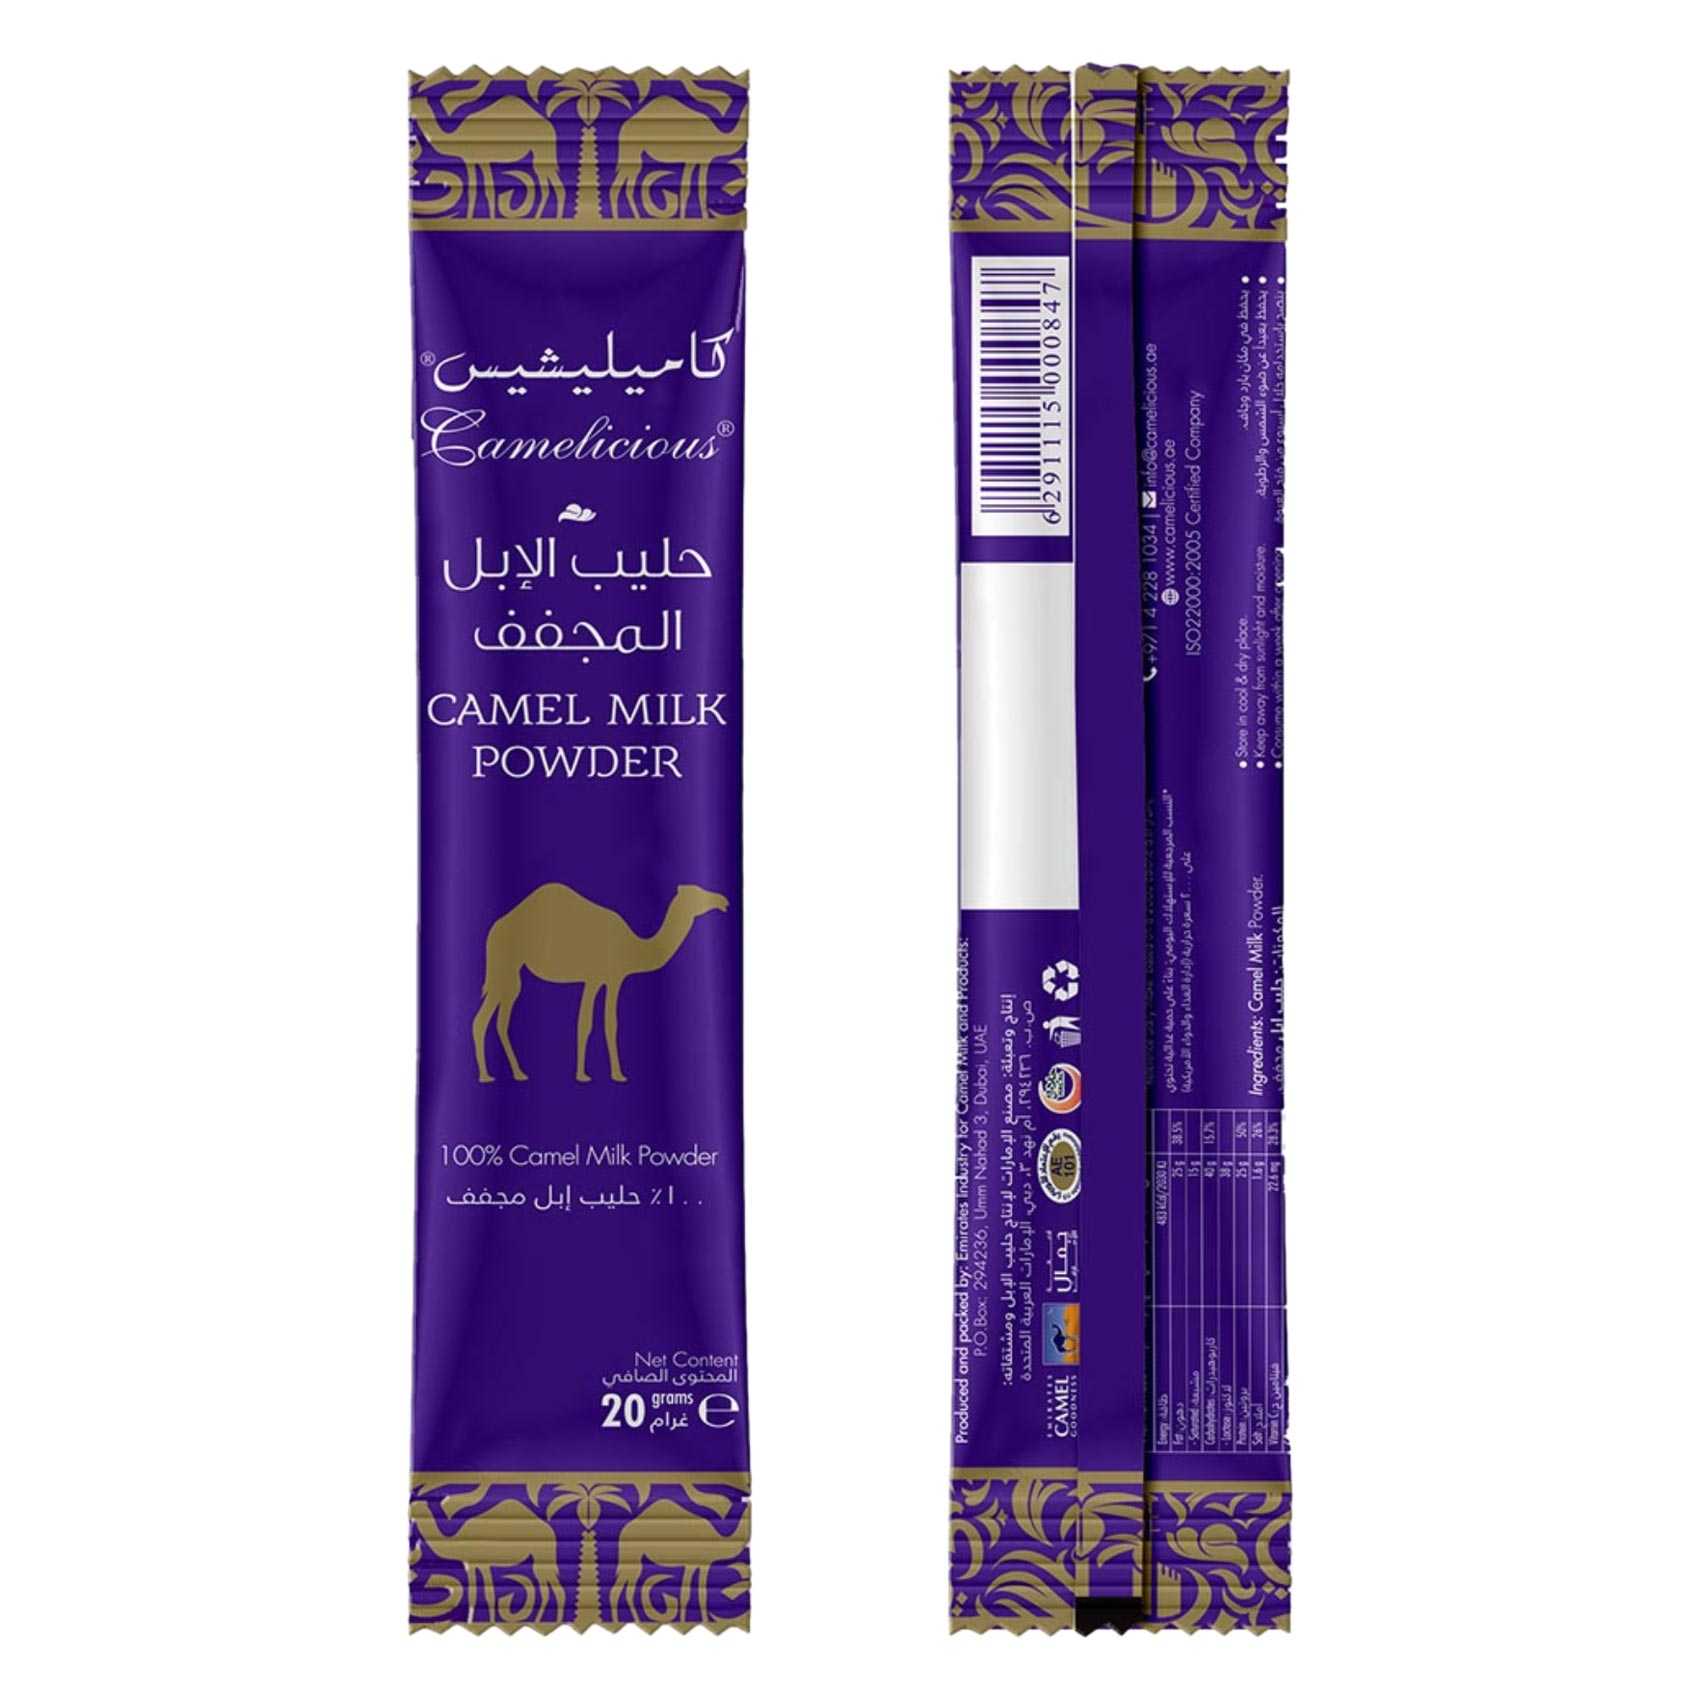 Camelicious Camel Milk Powder 20g Pack of 24